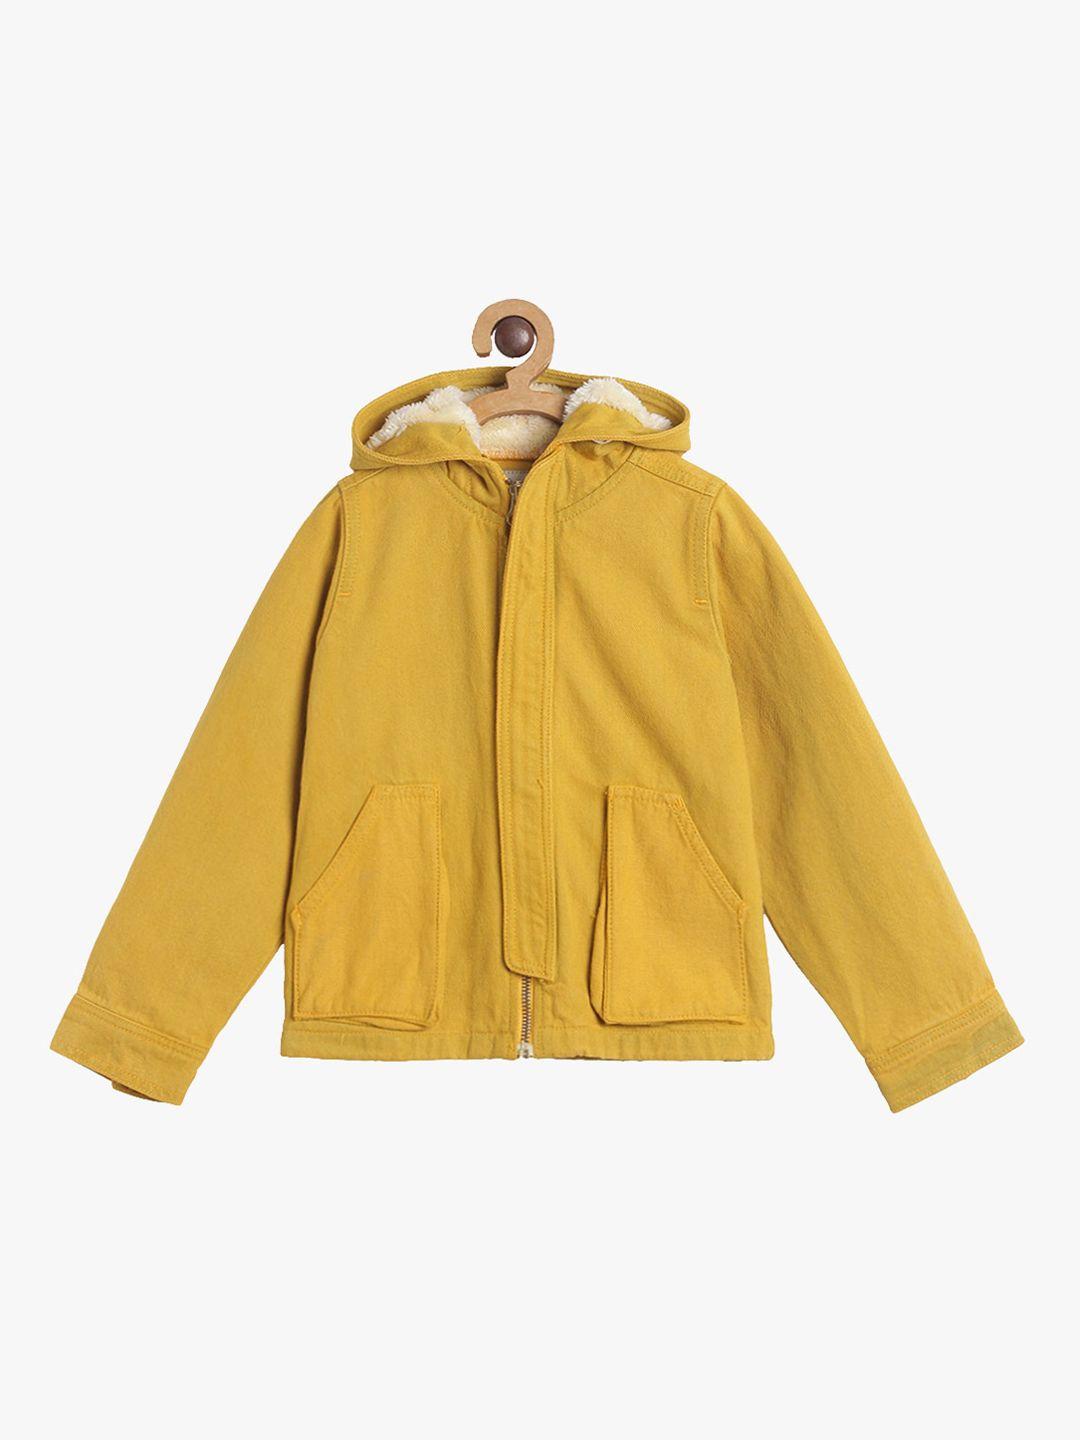 tales & stories boys mustard yellow solid cotton hooded tailored jacket